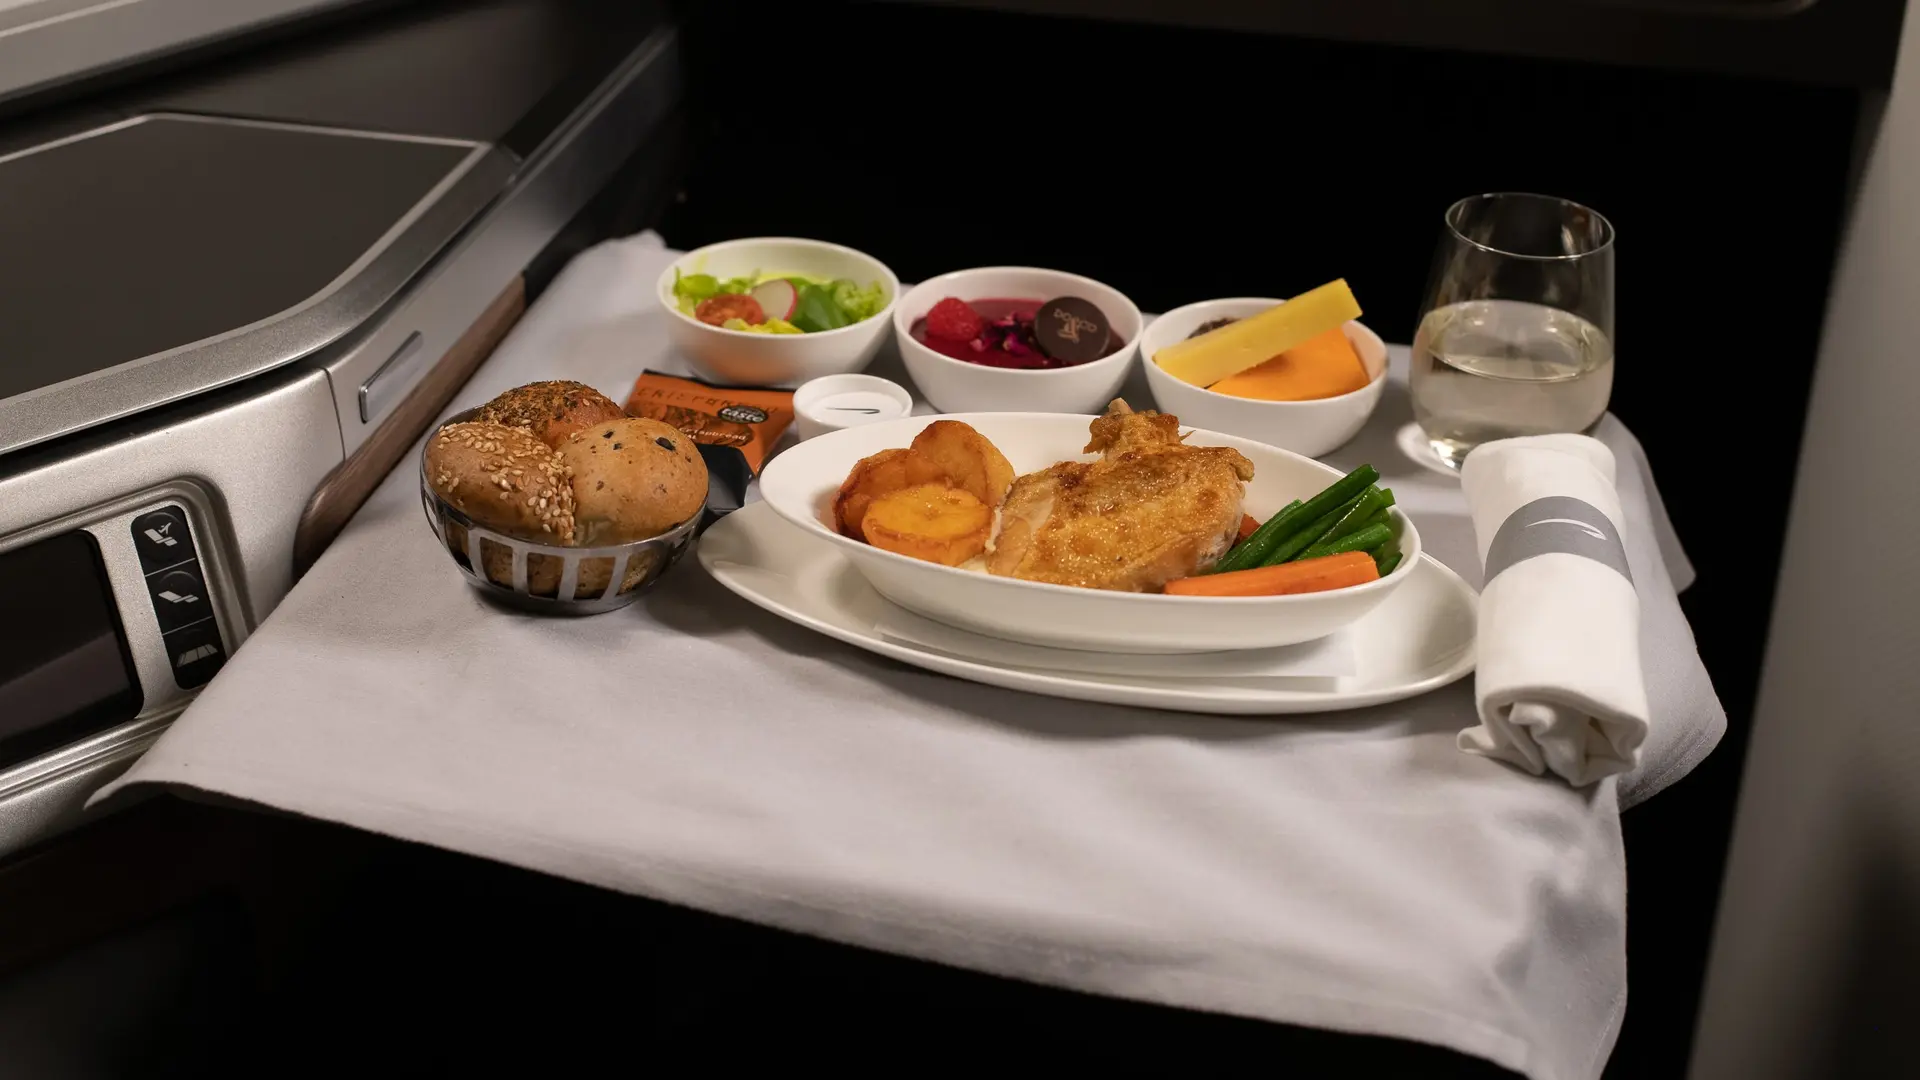 Airlines News - BA takes British gastro pub concept into the skies